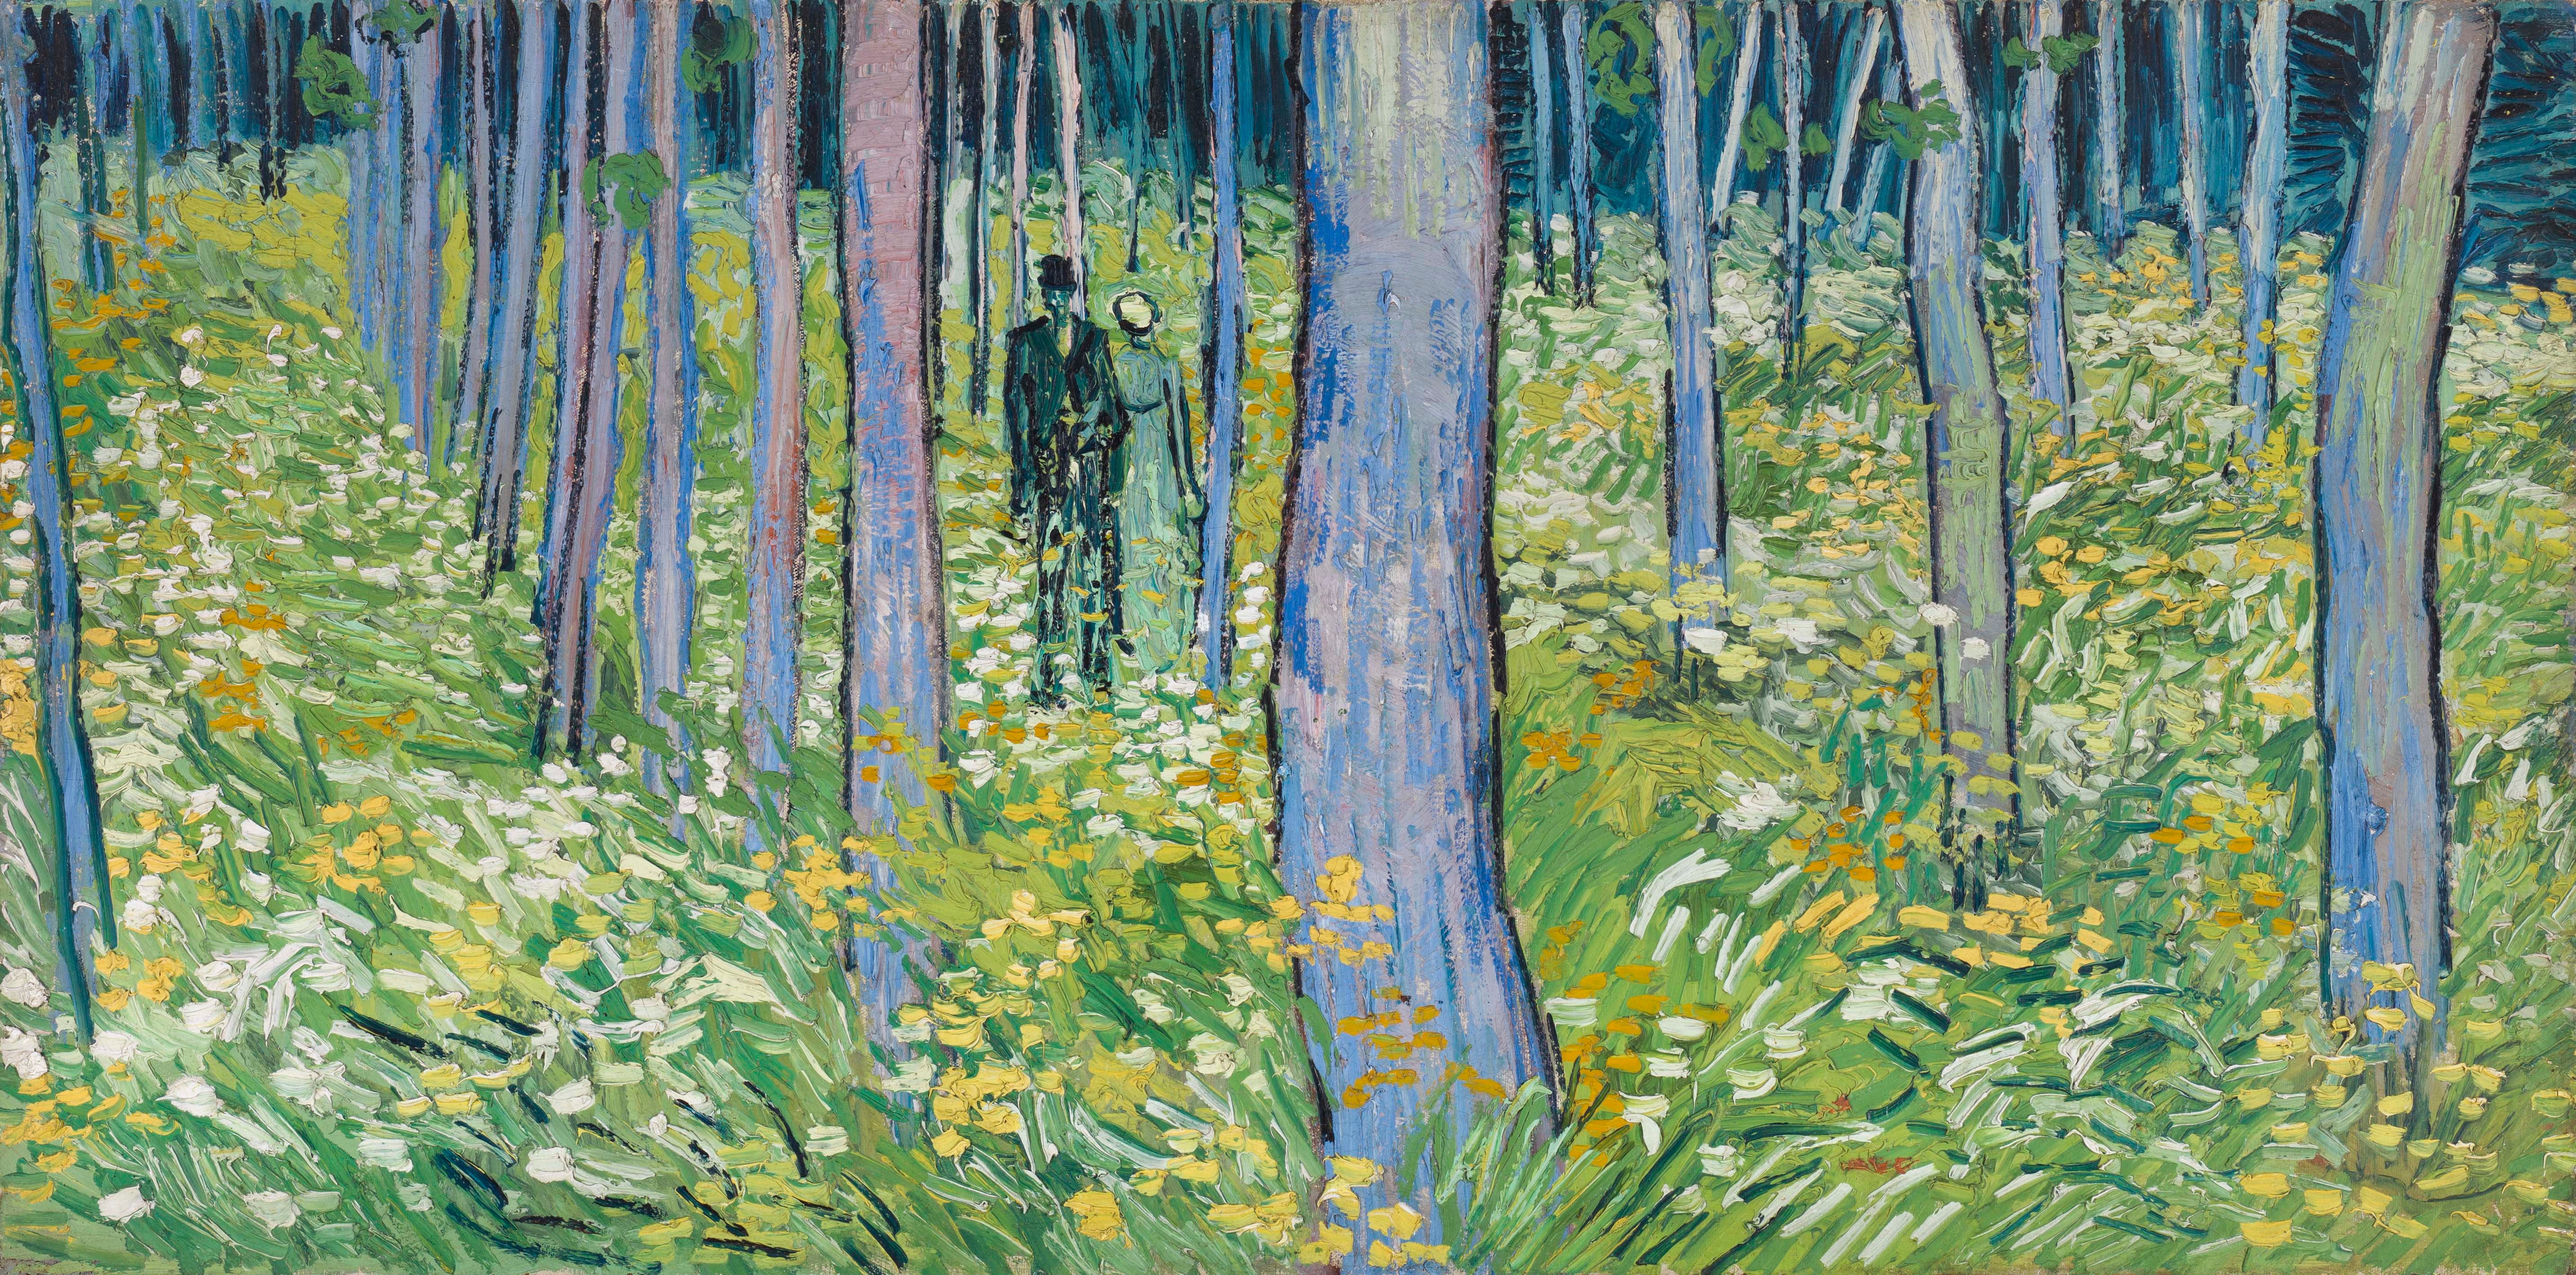 Vincent van Gogh (Dutch, 1853–1890). Undergrowth with Two Figures, 1890. Oil on canvas; 19 1/2 x 39 1/4 in. (49.5 x 99.7 cm). Cincinnati Art Museum, bequest of Mary E. Johnston, 1967.1430